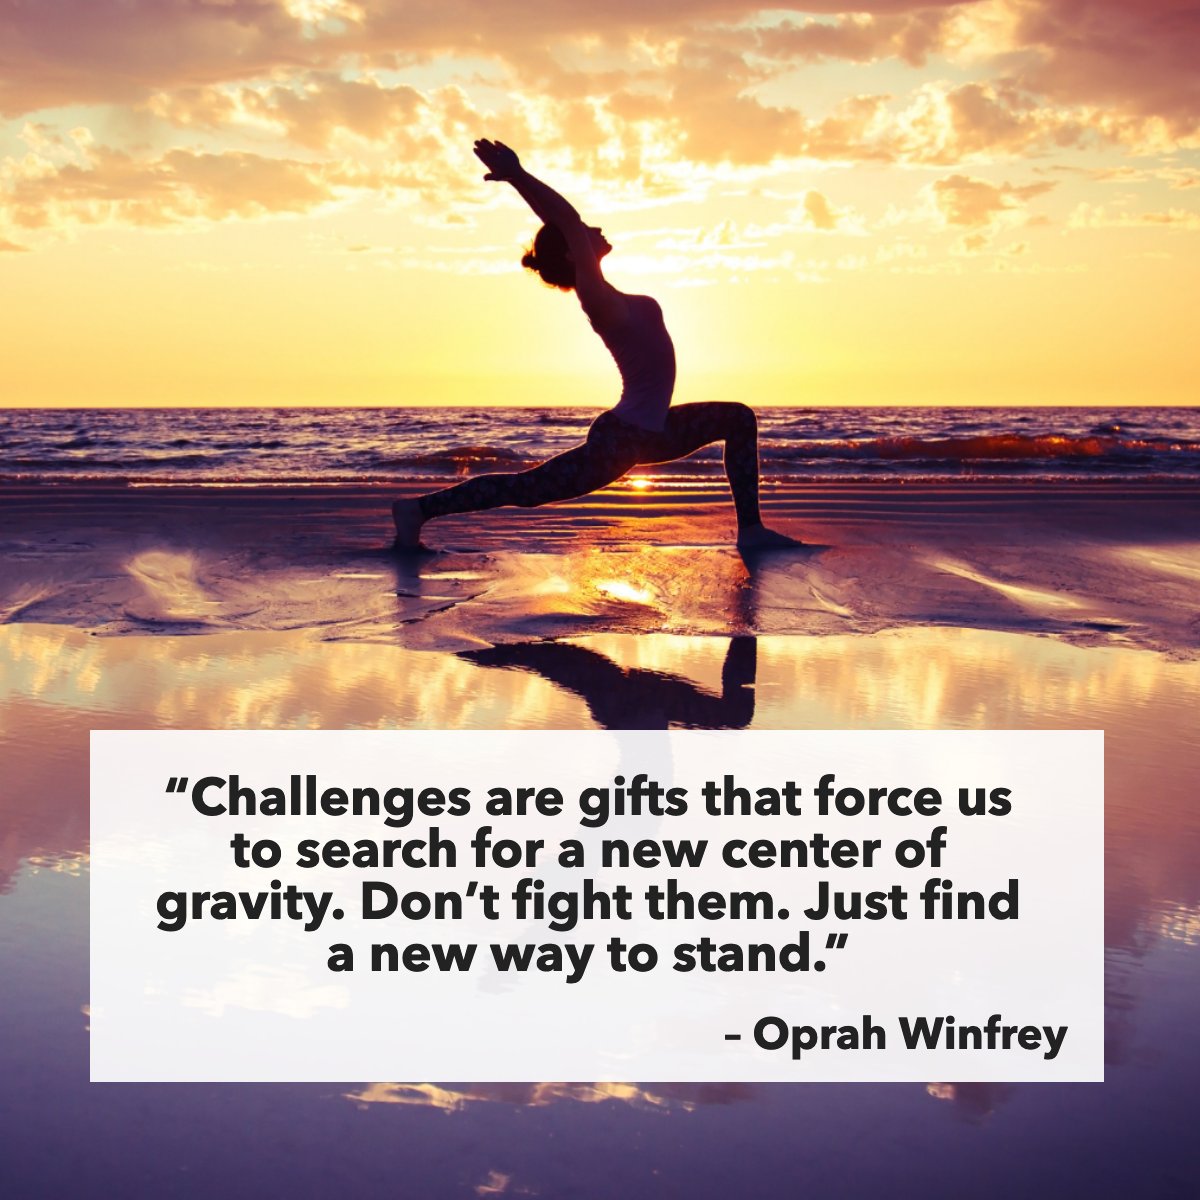 'Challenges are gifts that force us to search for a new center of gravity. Don't fight them. Just find a new way to stand.' 💪 
– Oprah

How do take on the challenges in your life?

#challenges #quote #inspirational #yoga #beach #oprahwinfrey #oprah